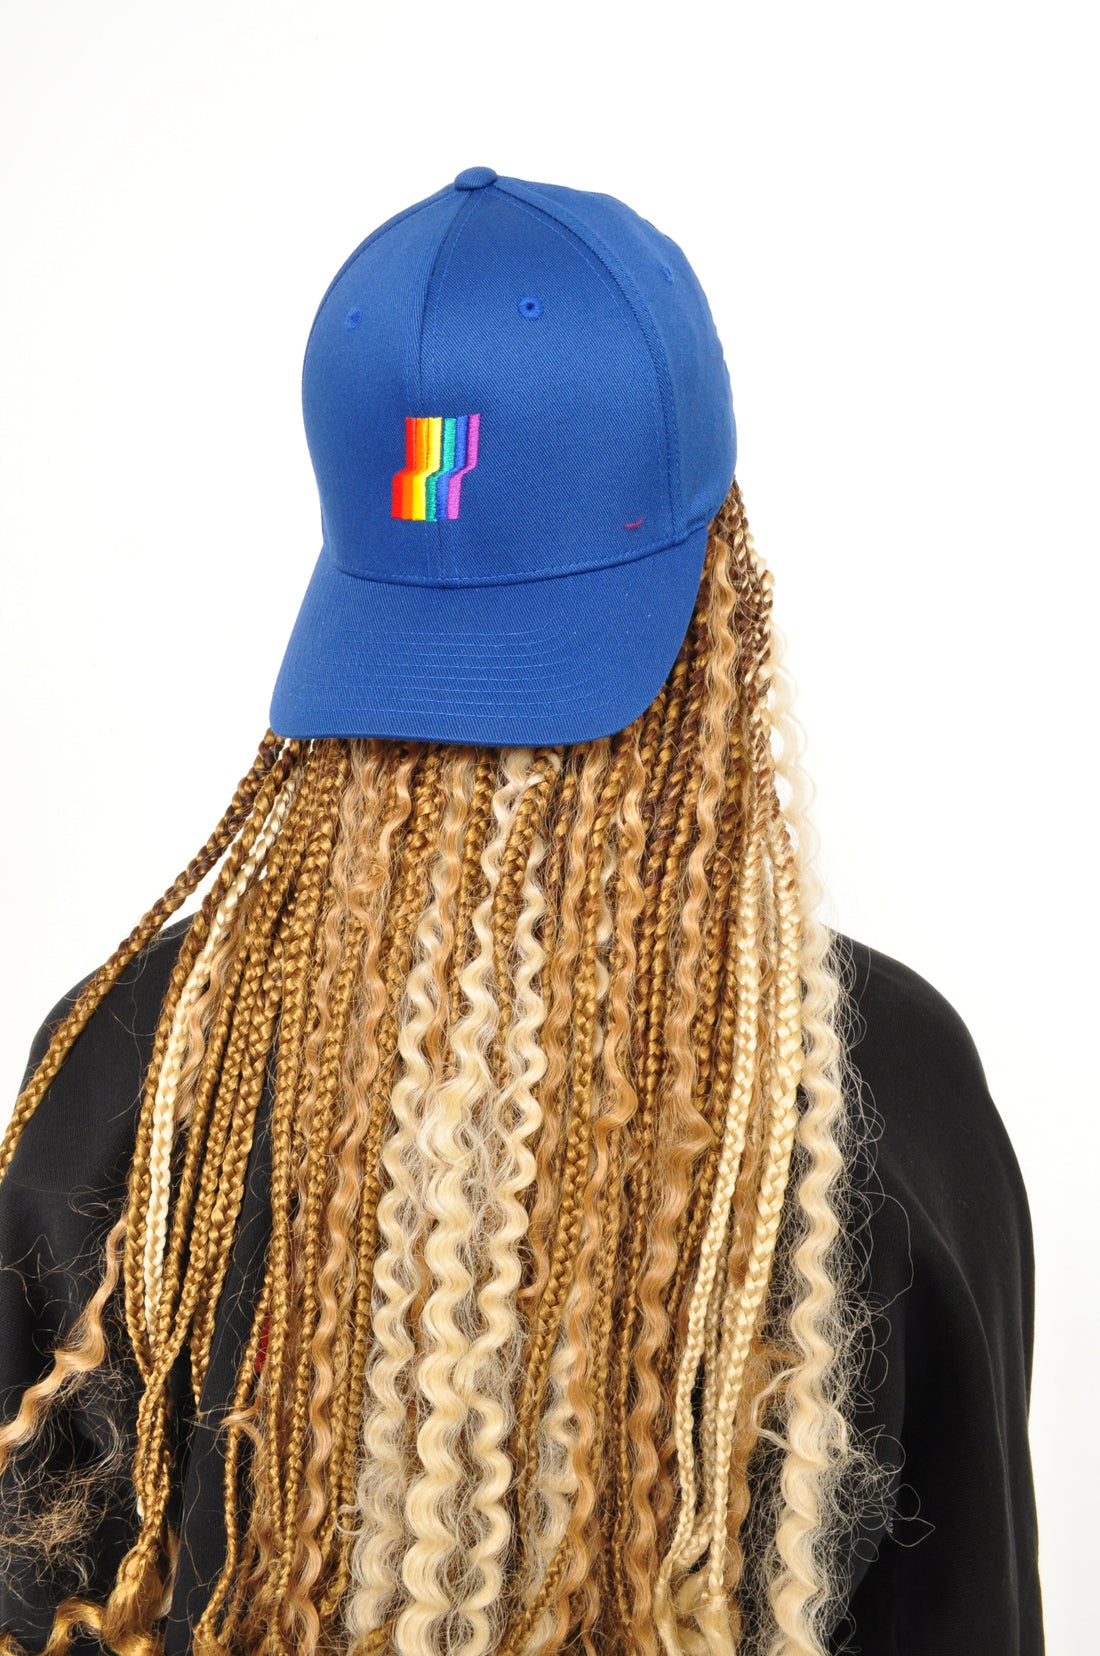 AGOGO • Casquette Fitted Rainbow 